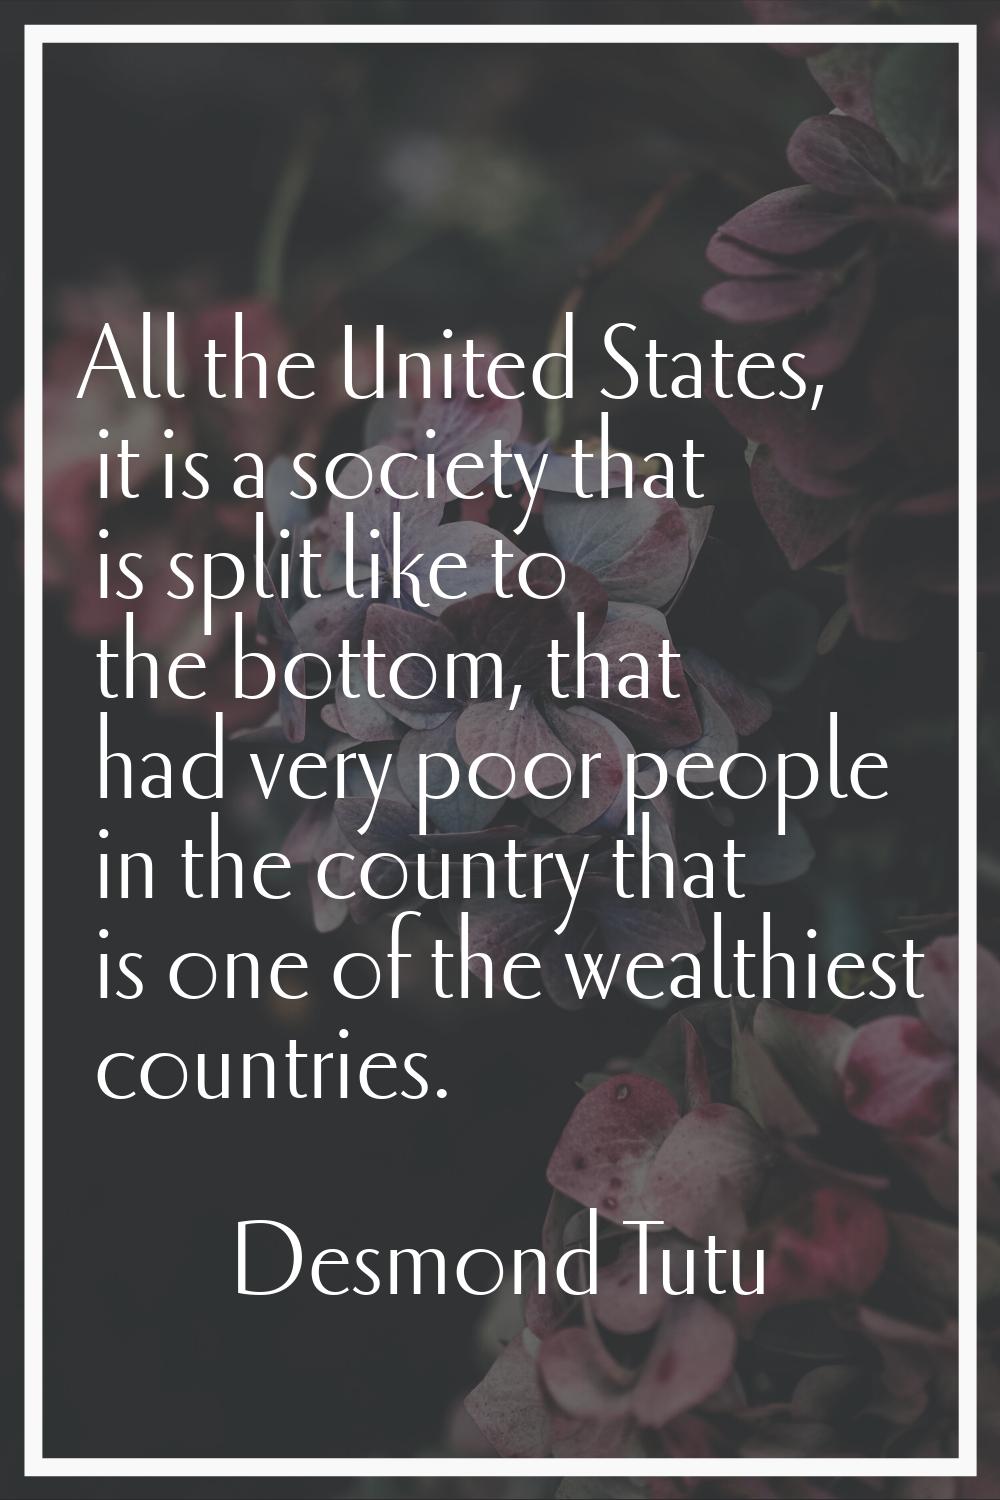 All the United States, it is a society that is split like to the bottom, that had very poor people 